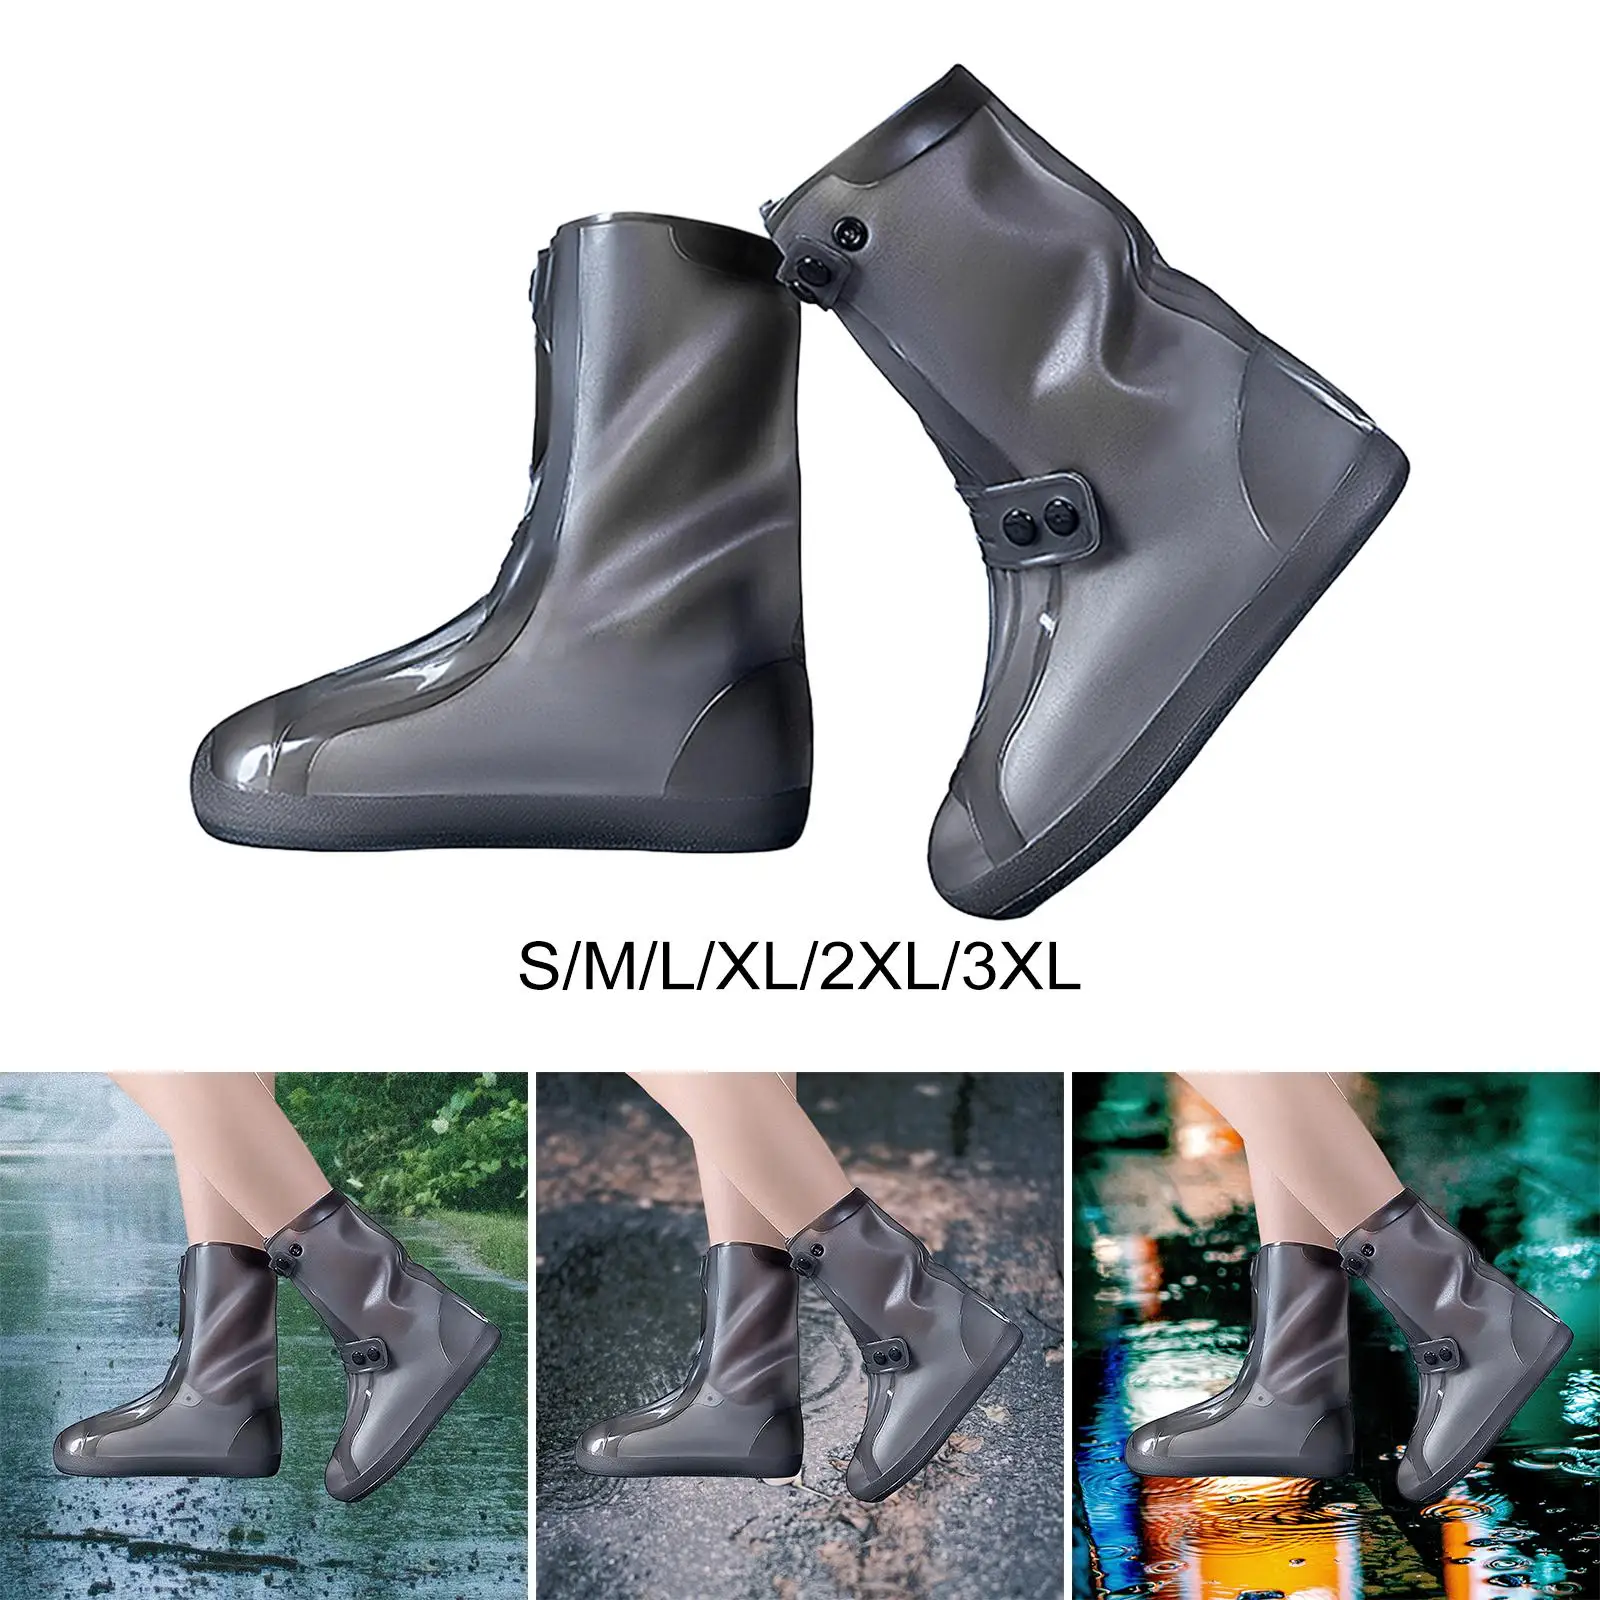 Waterproof Shoe Covers Foldable Anti Slip Men Women Rain Overshoes Shoes Protector for Outdoor Travel Hiking Outside Camping